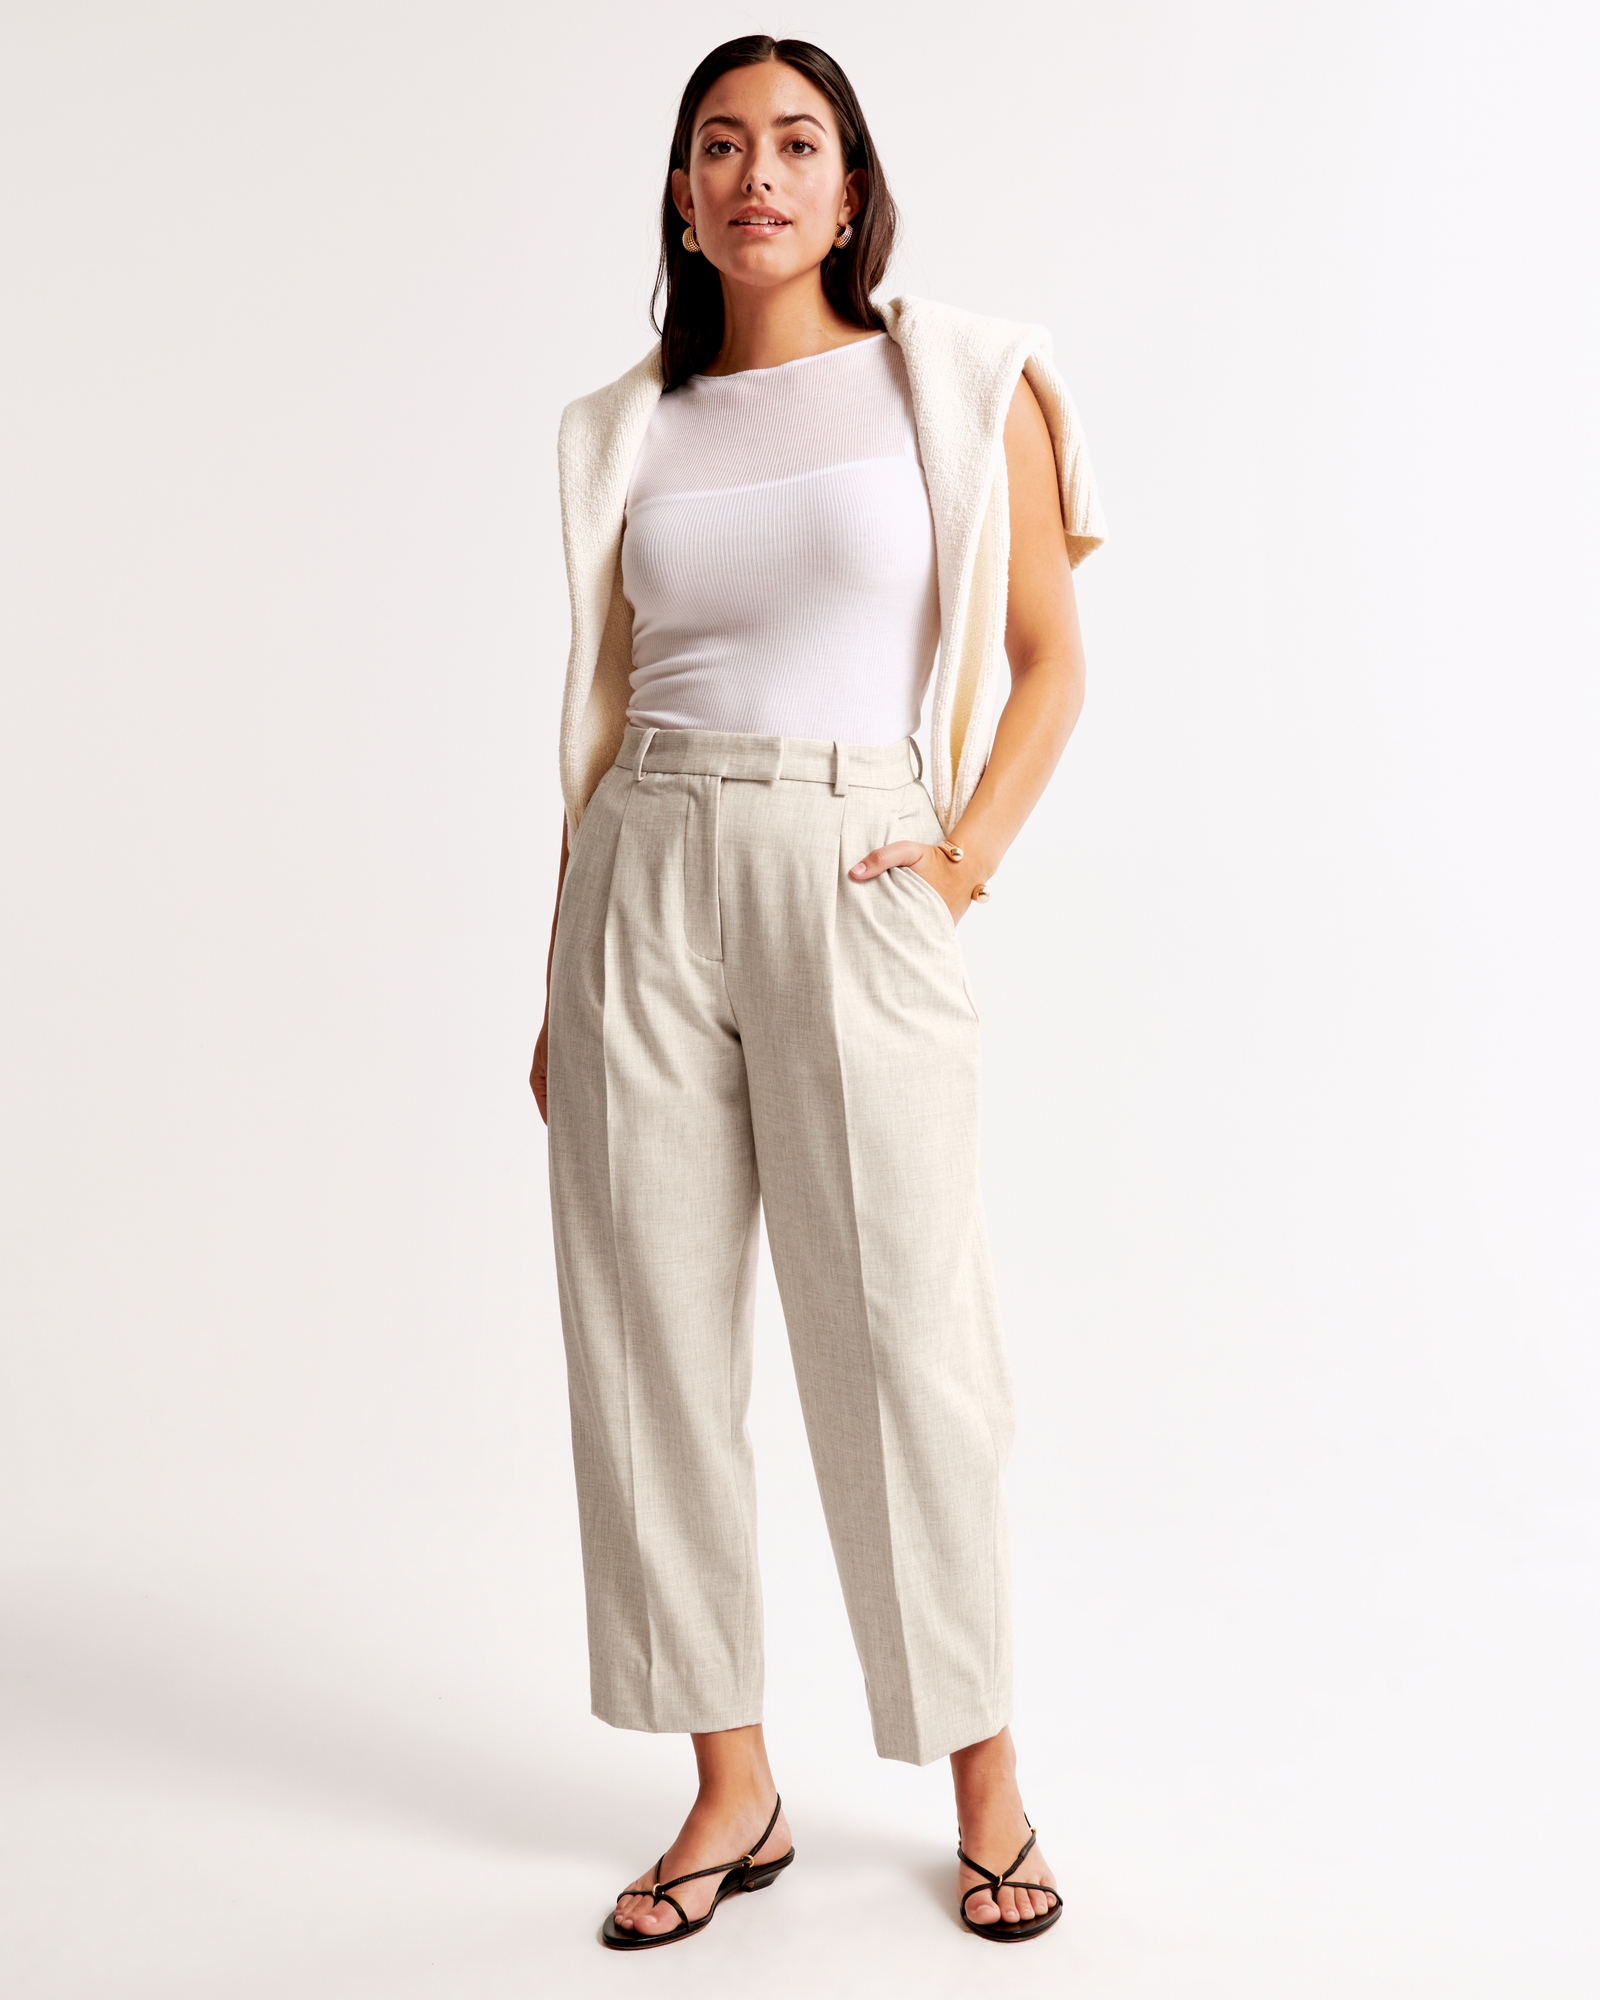 Curve Love Ankle Grazing Tapered Tailored Pant